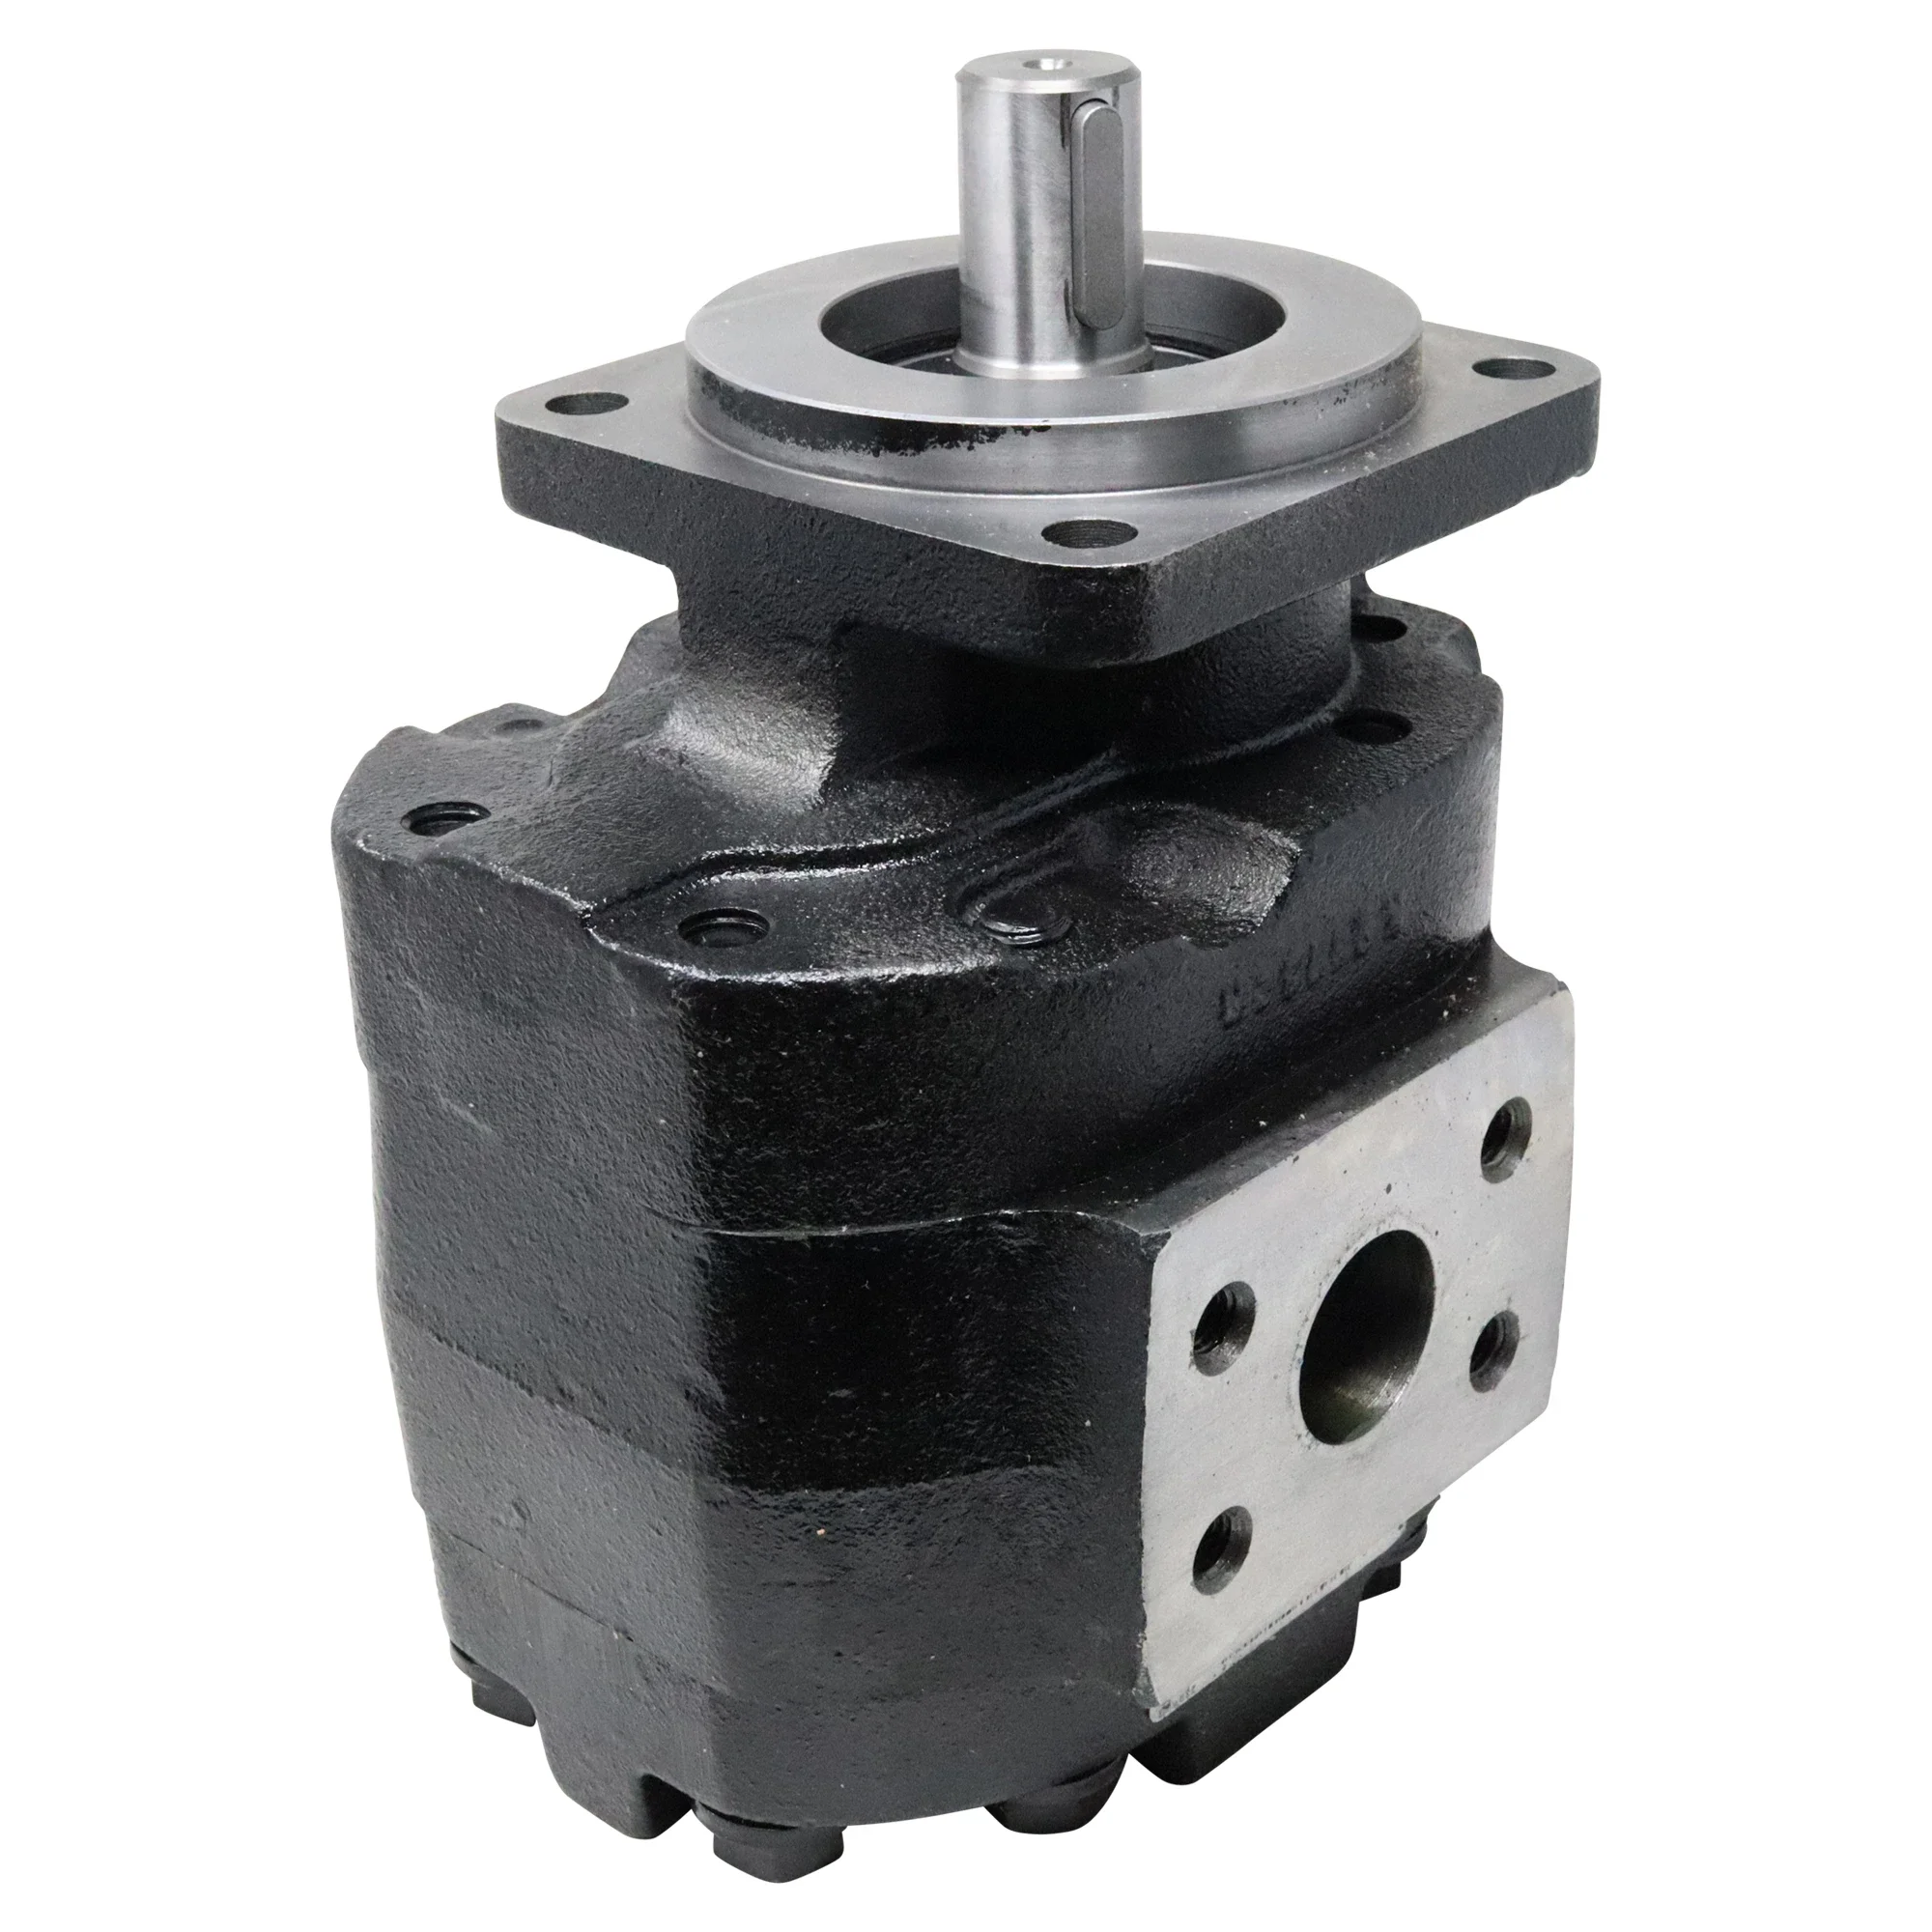 Wastebuilt® Replacement for Leach Front Mount Pump